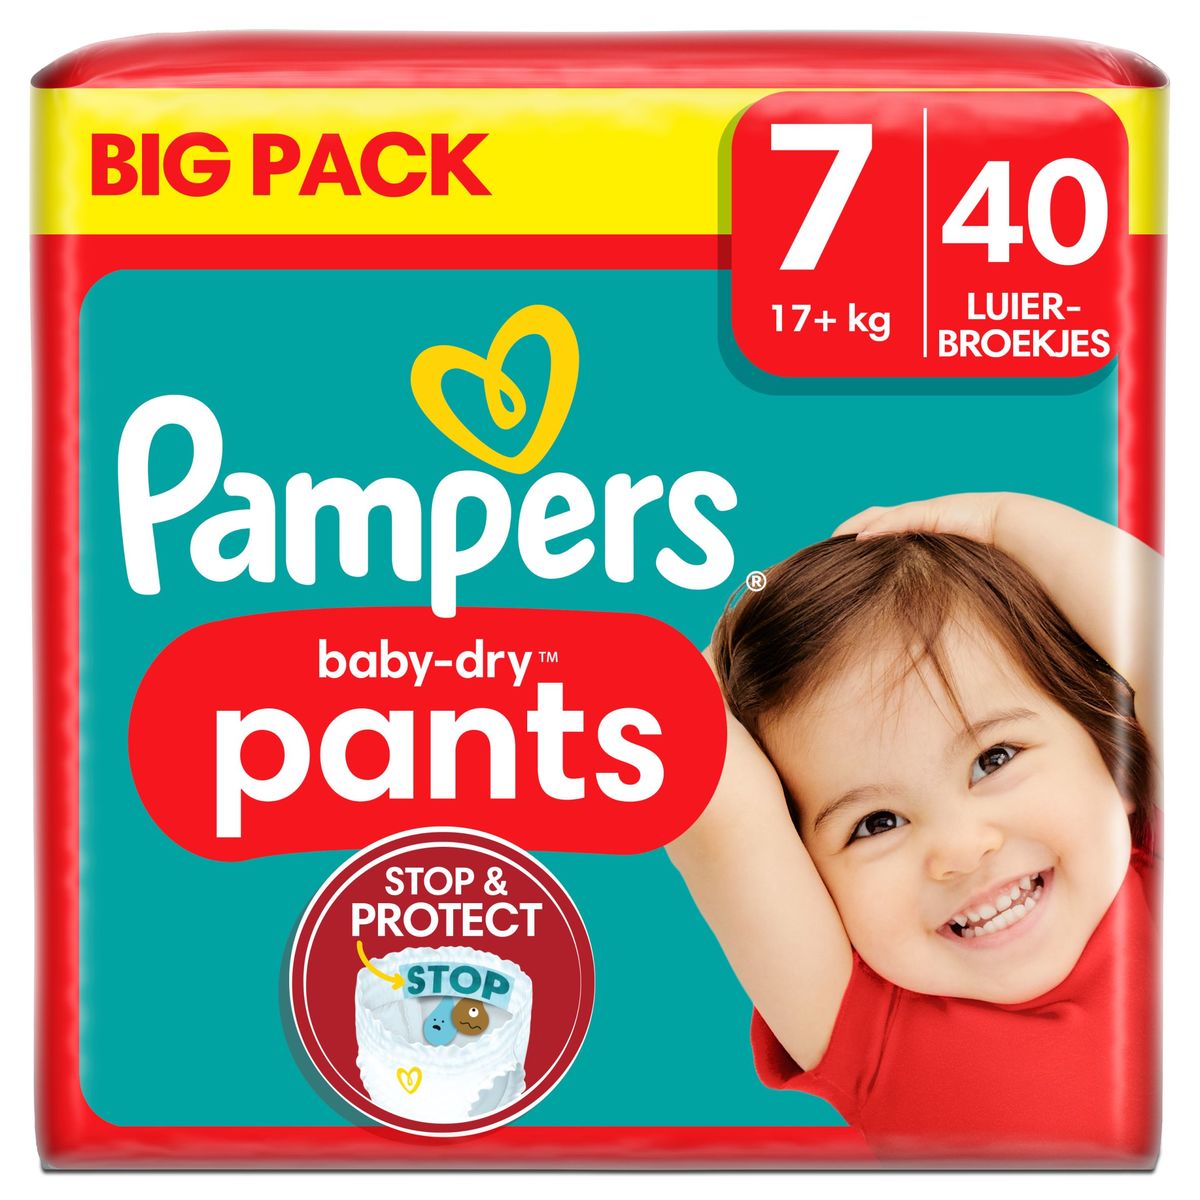 Couches-culottes PAMPERS Baby-Dry Night Pants - Taille 4 - 40